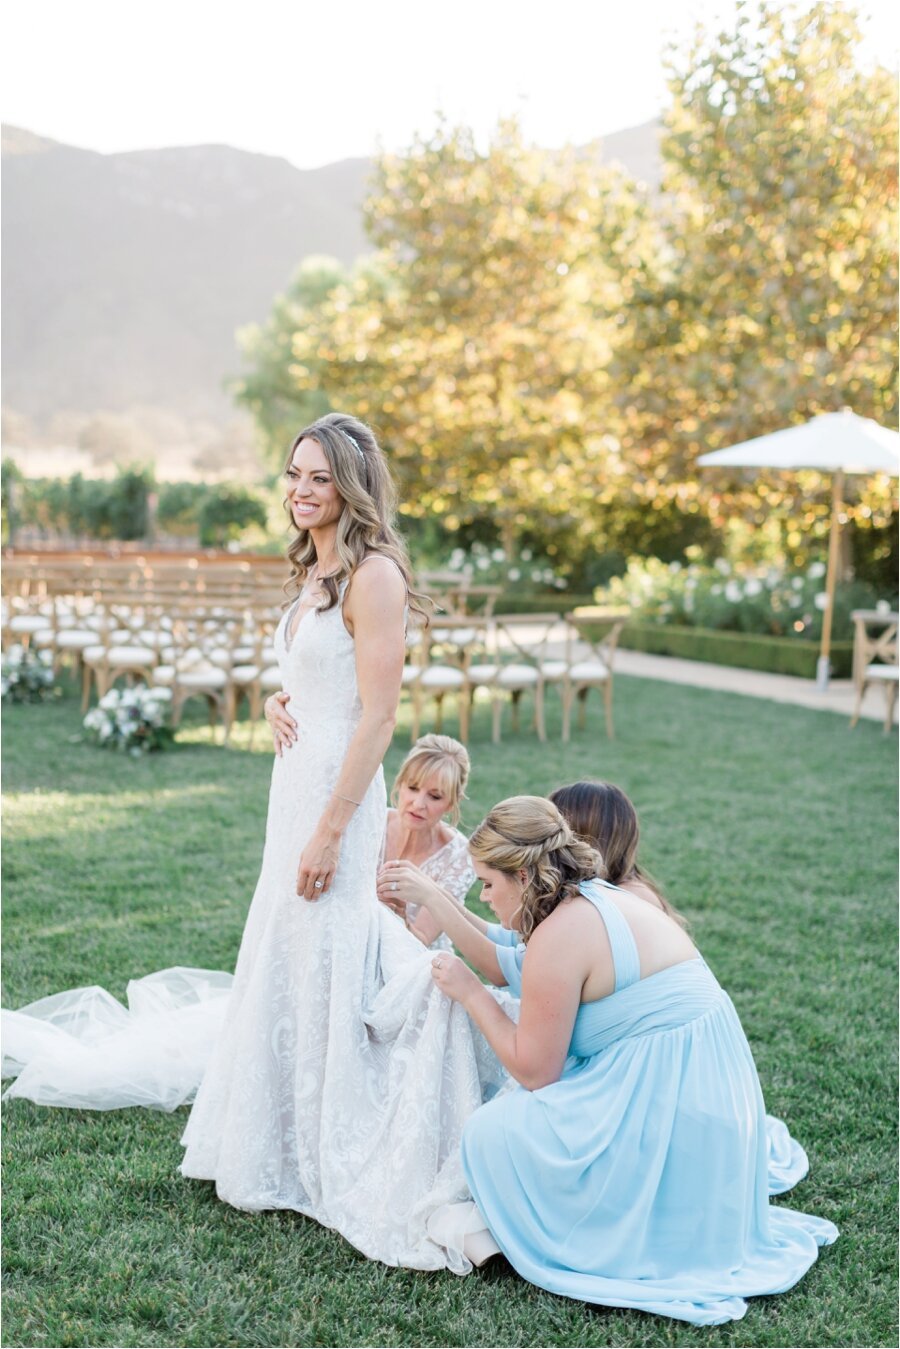 Candid moment of bride bustling her Hayley Paige wedding dress